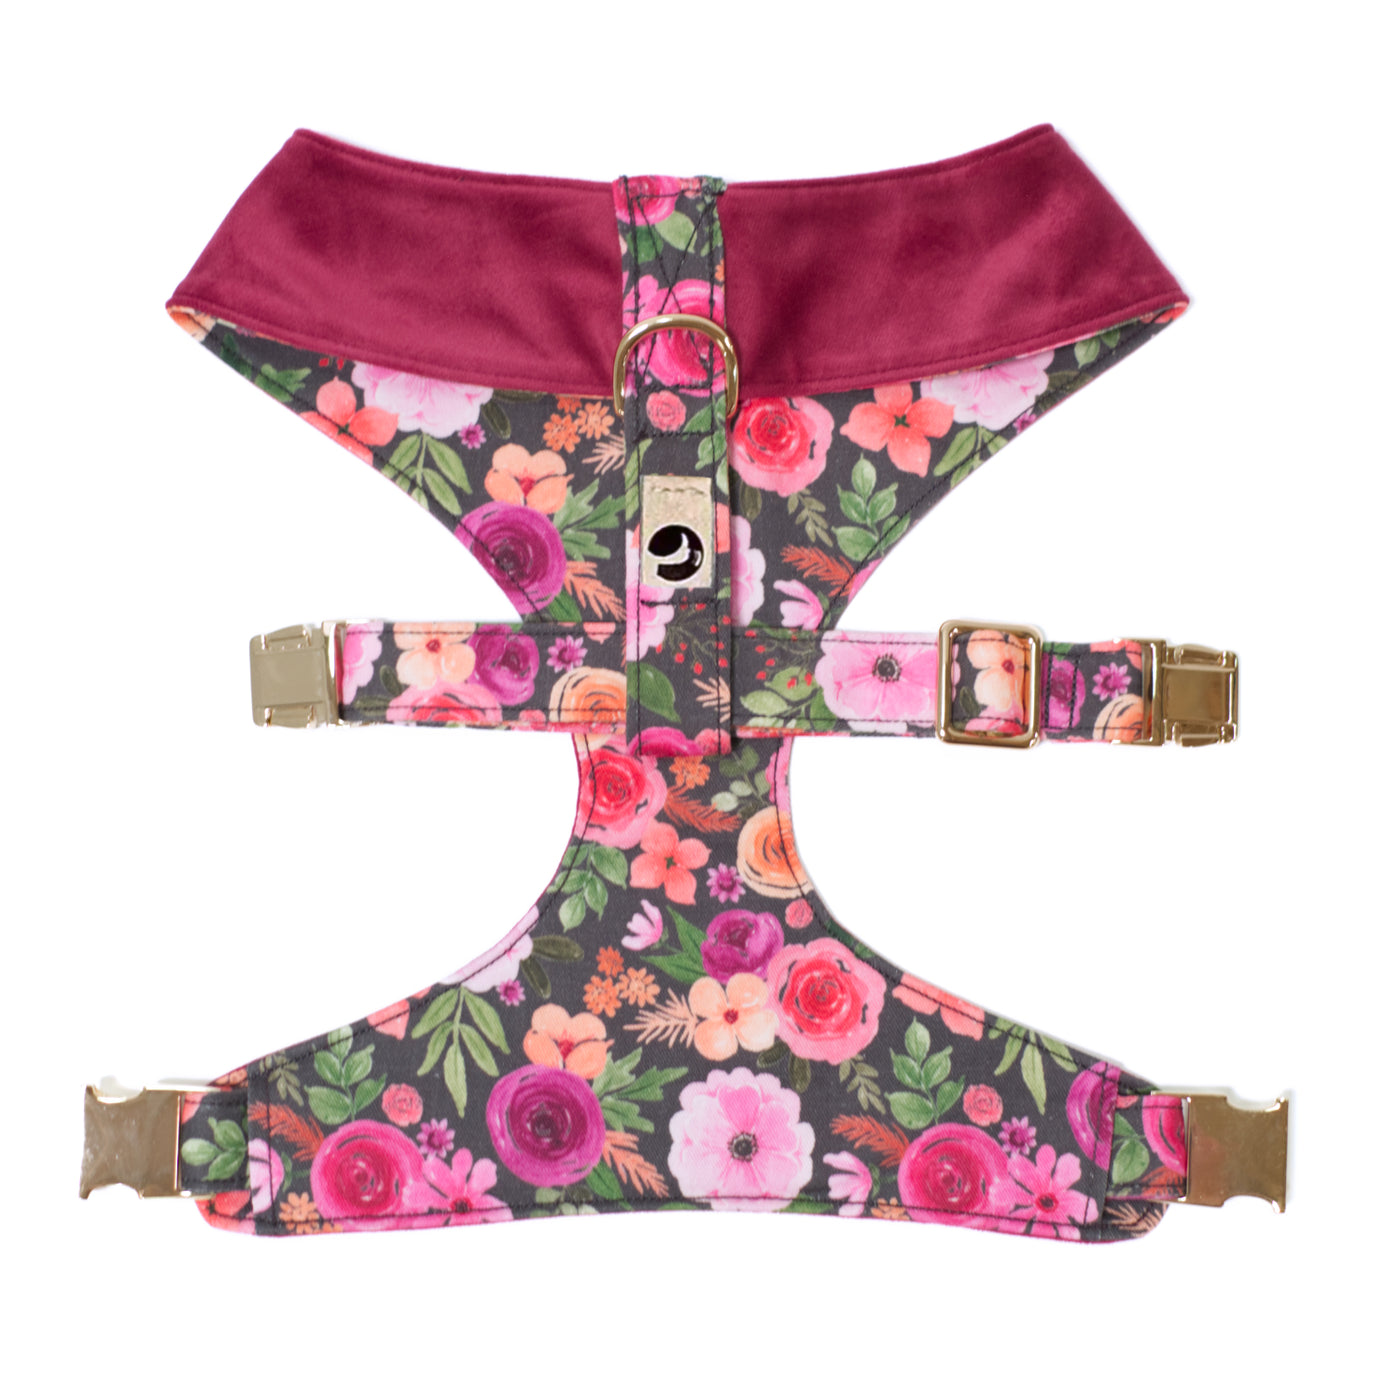 Top/back view of wine colored velvet and floral reversible dog harness with gold hardware